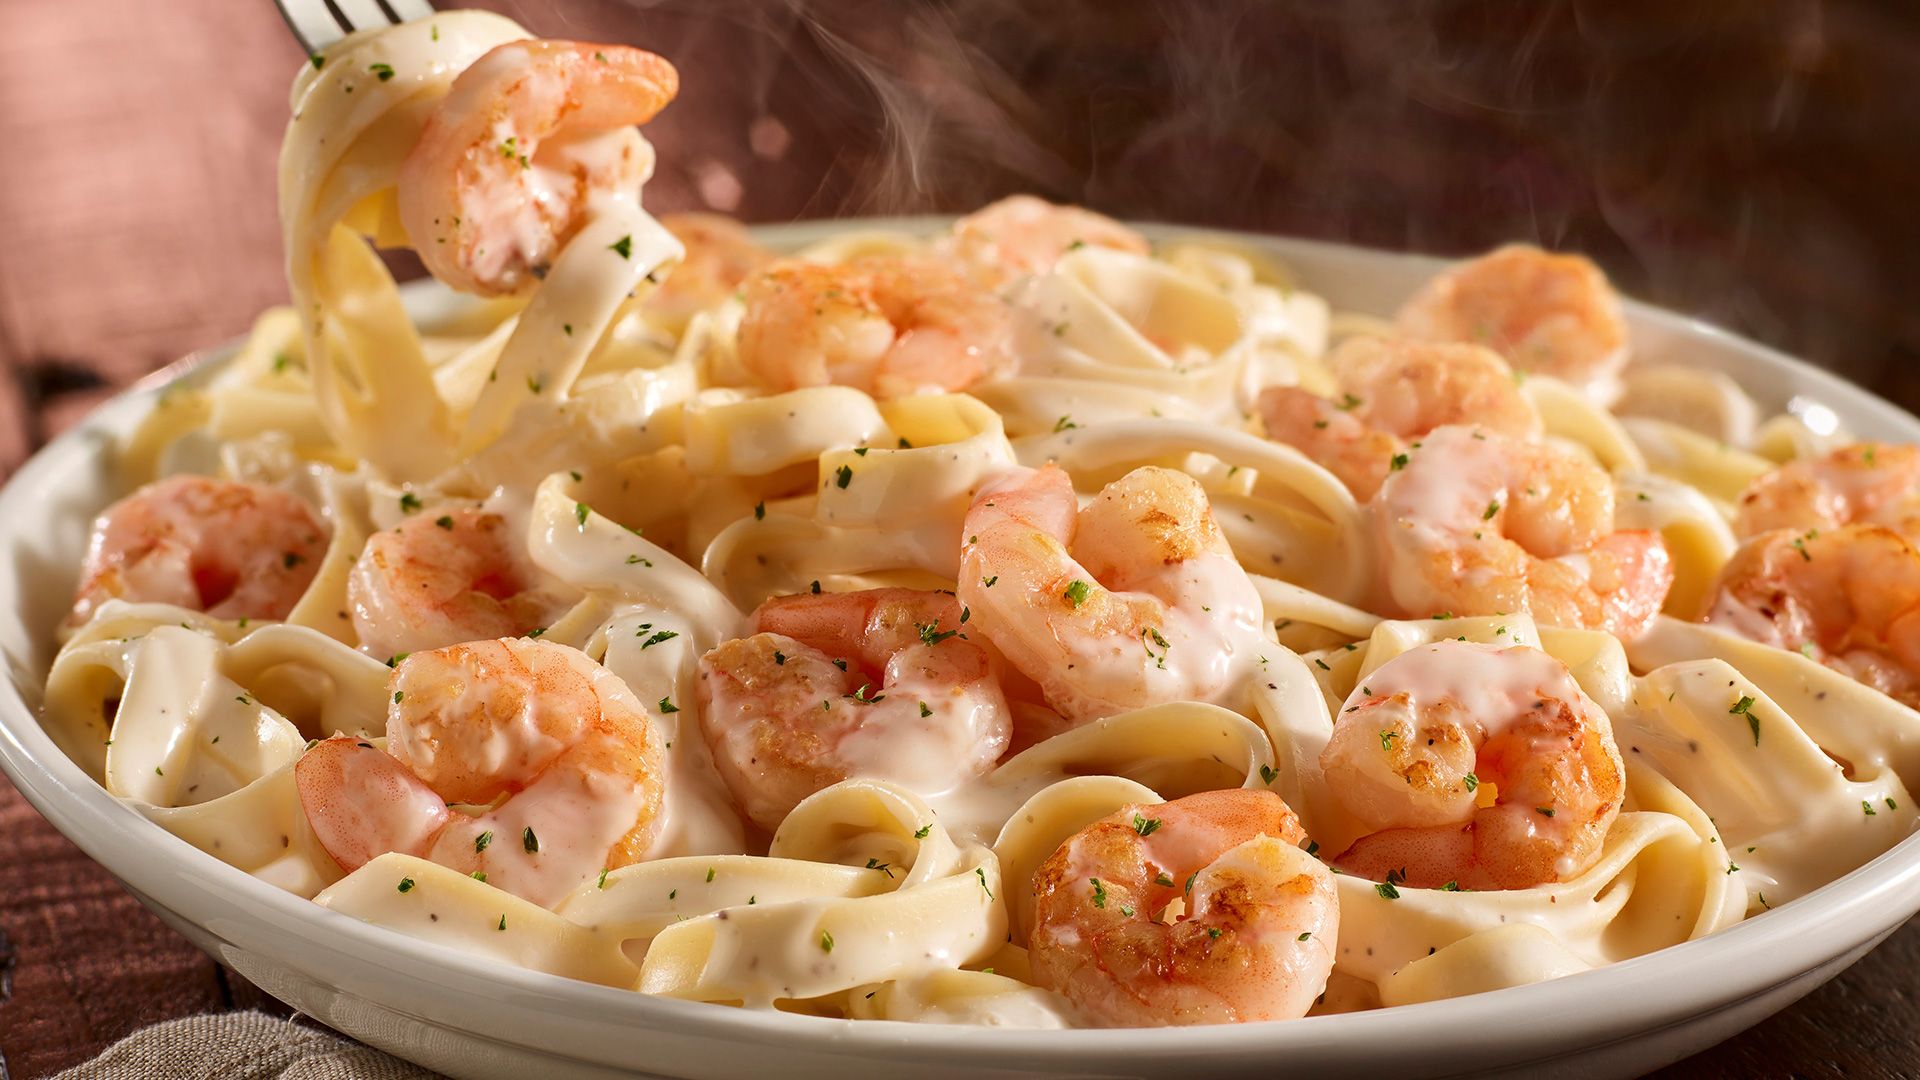 Olive Garden Deals: $7.99 Lunch Specials, $5 Entrees & Unlimited Sides